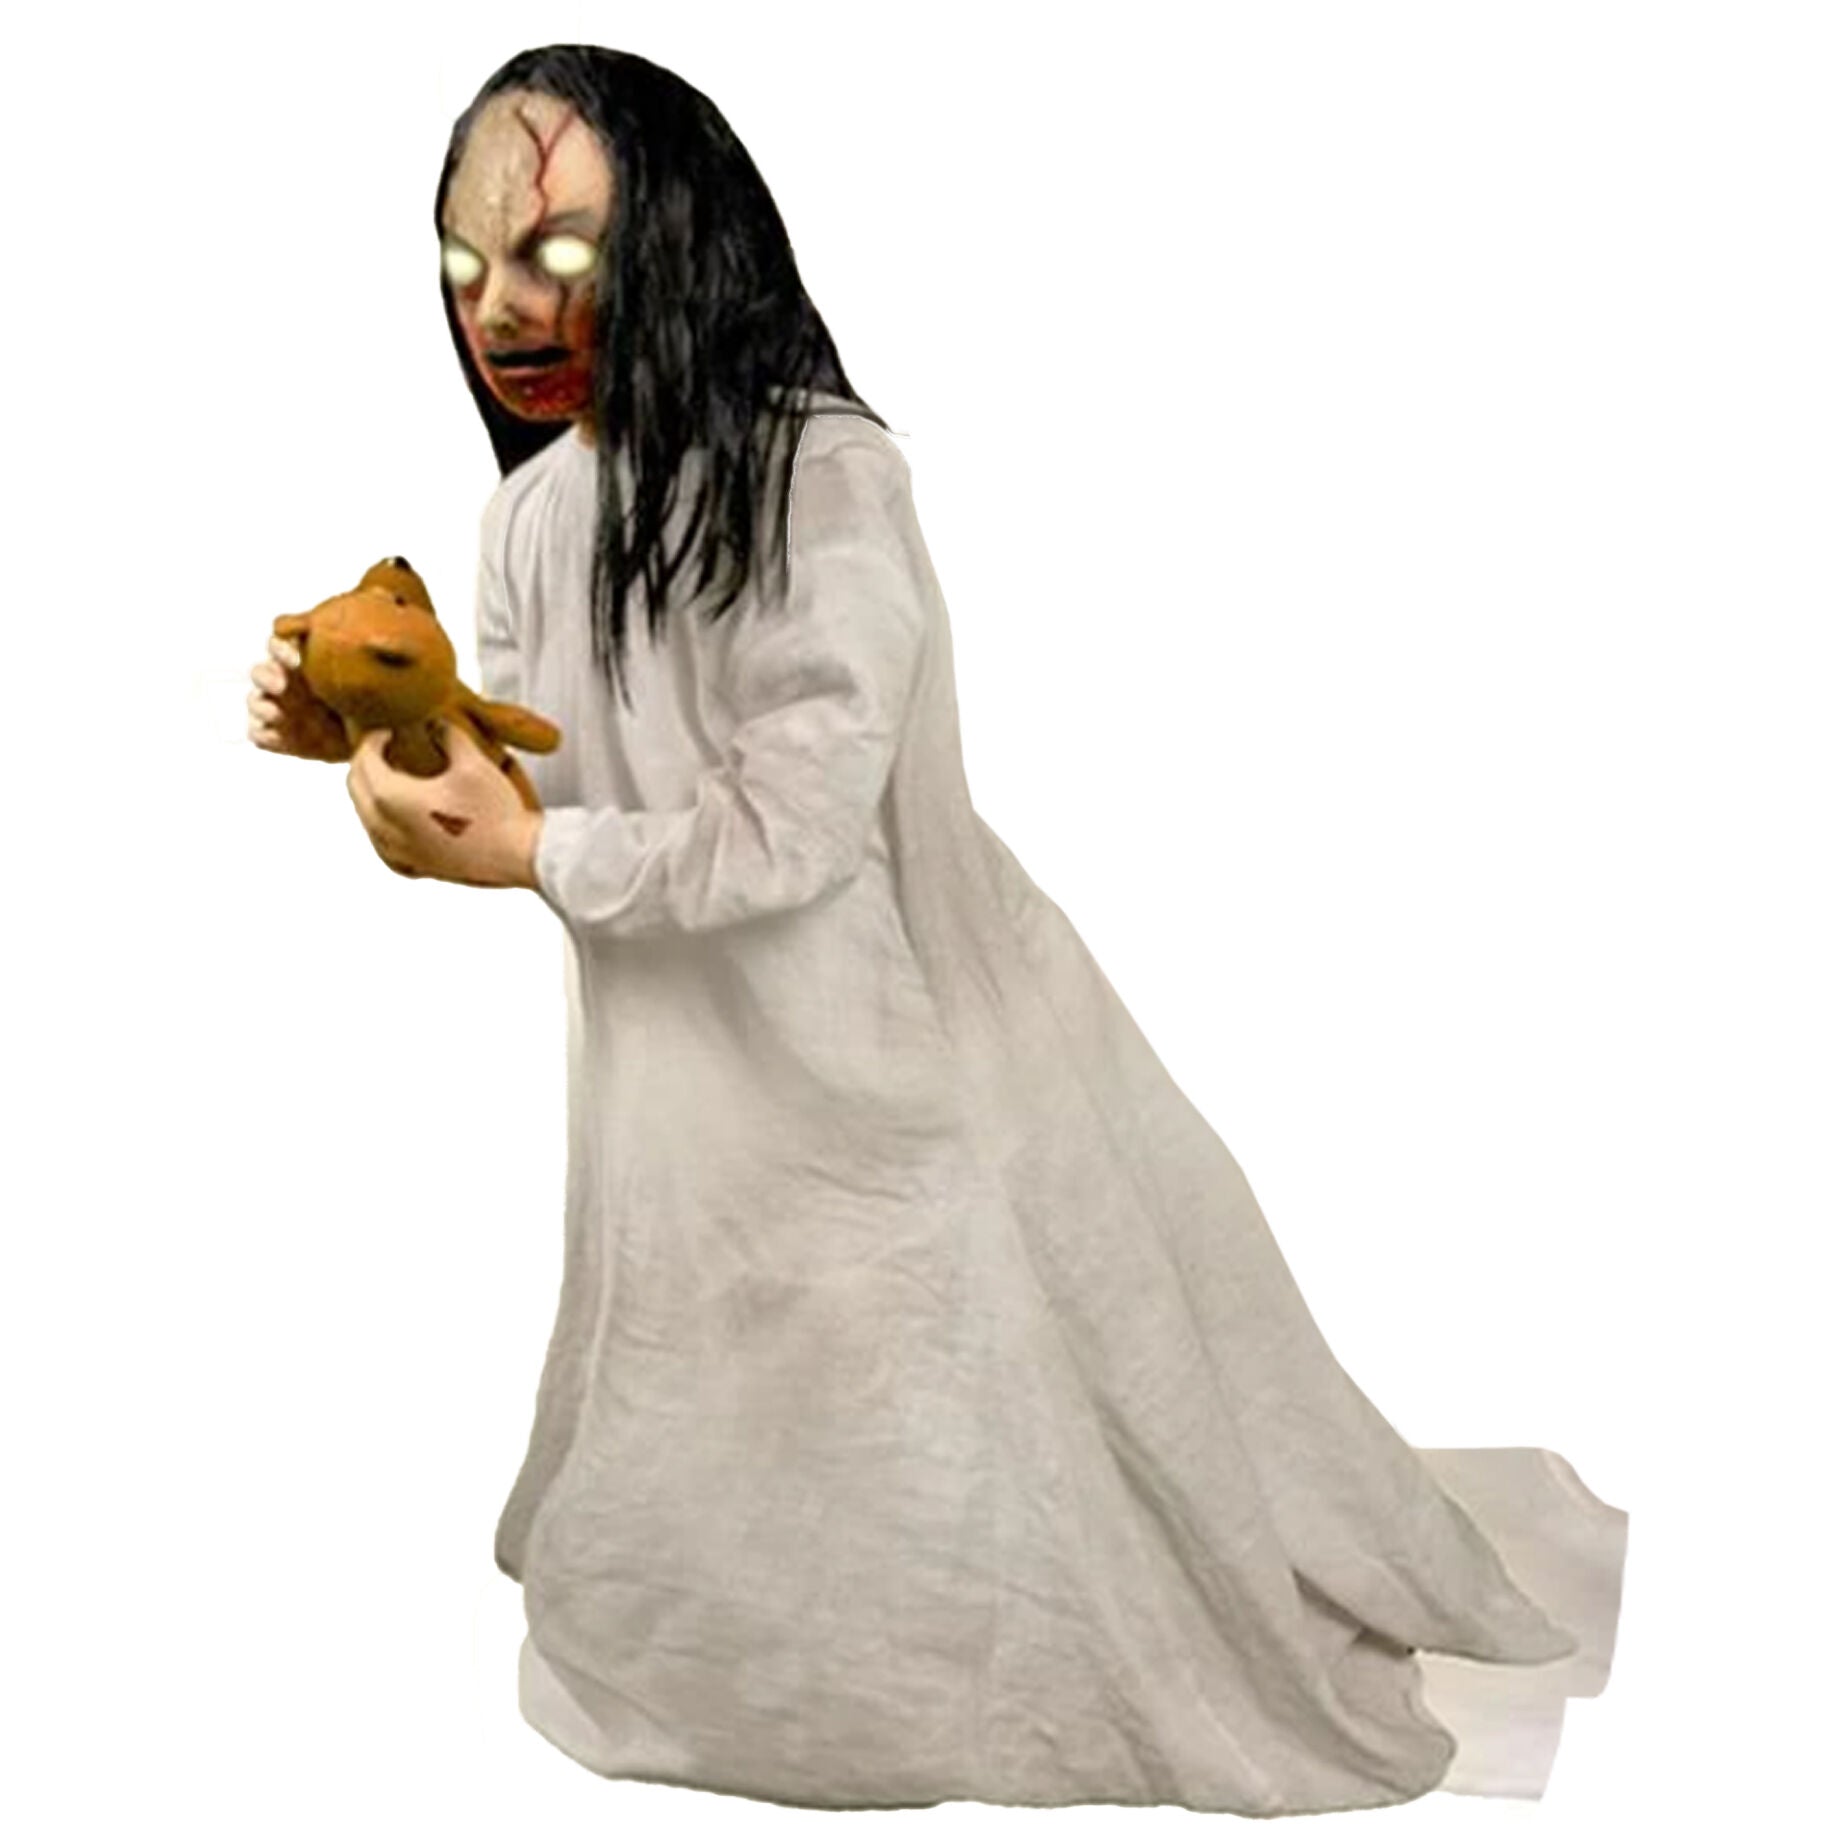 Haunted Hill Farm - Motion-Activated Lunging Lily the Demonic Zombie Girl by Tekky, Premium Talking Halloween Animatronic, Plug-In or Battery